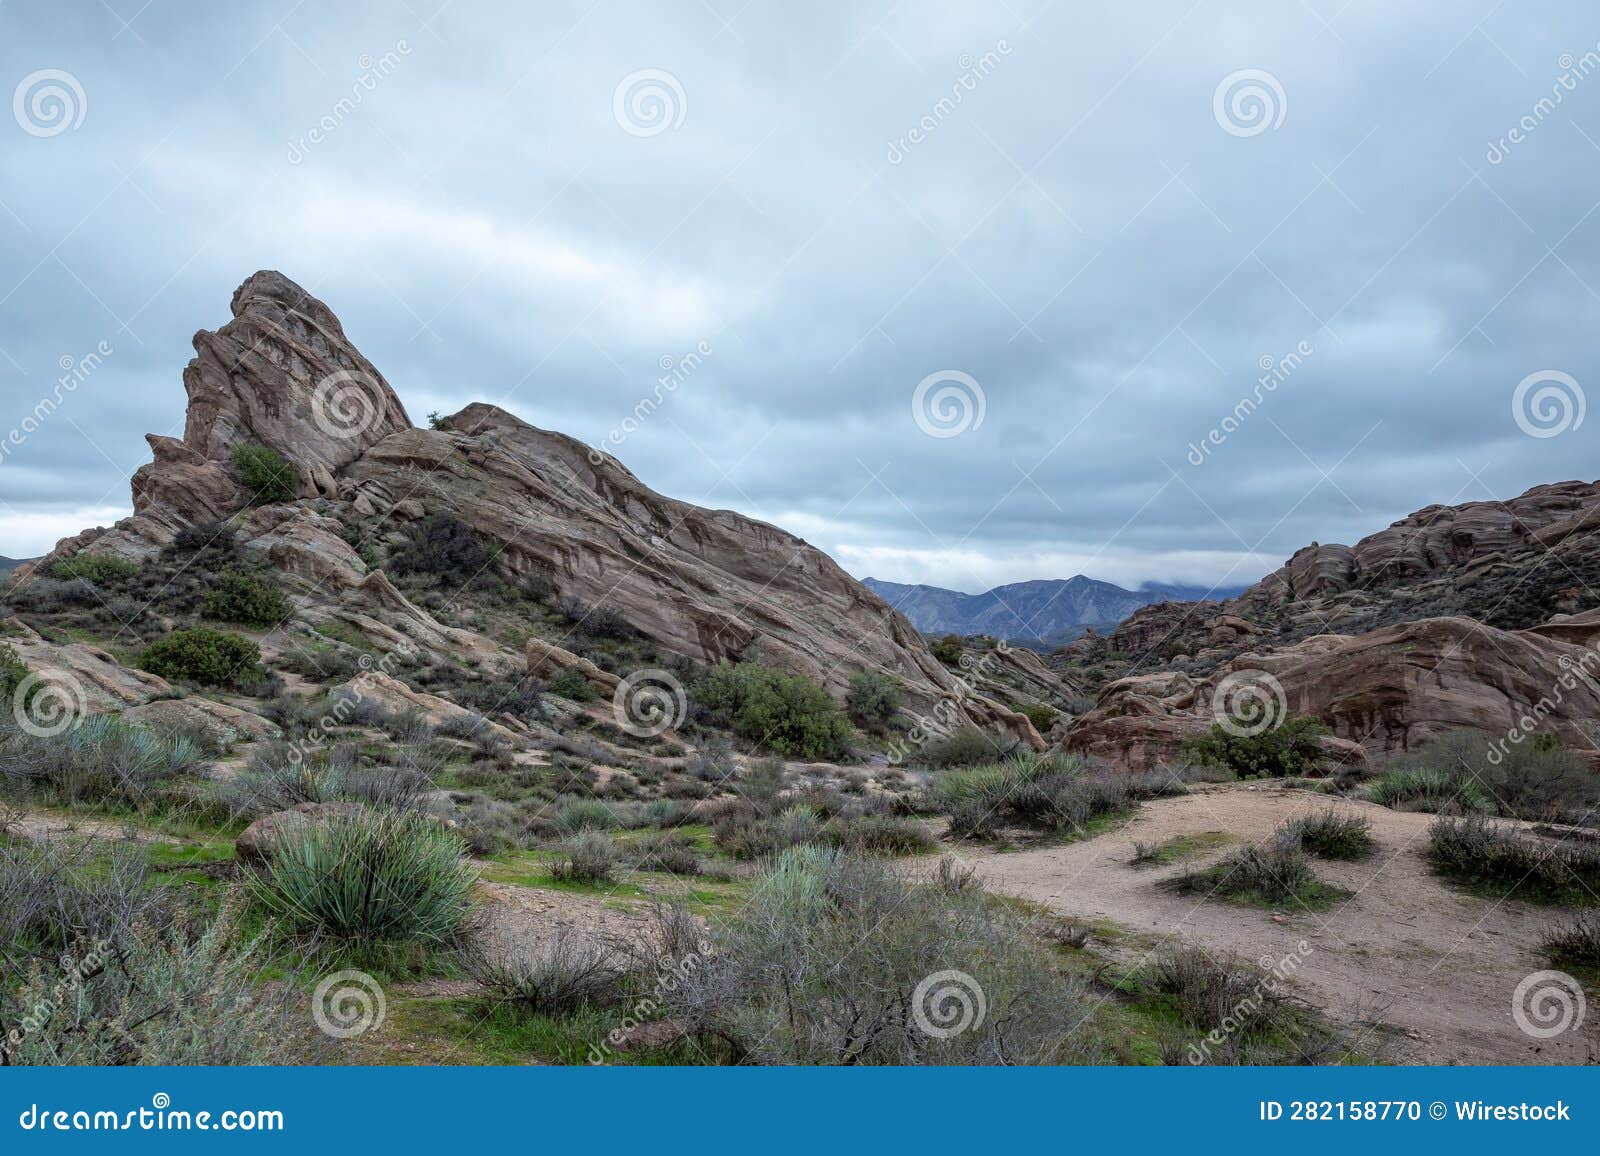 scenic view of vasquez rocks park in agua dulce, california with bushes against a clouded sky